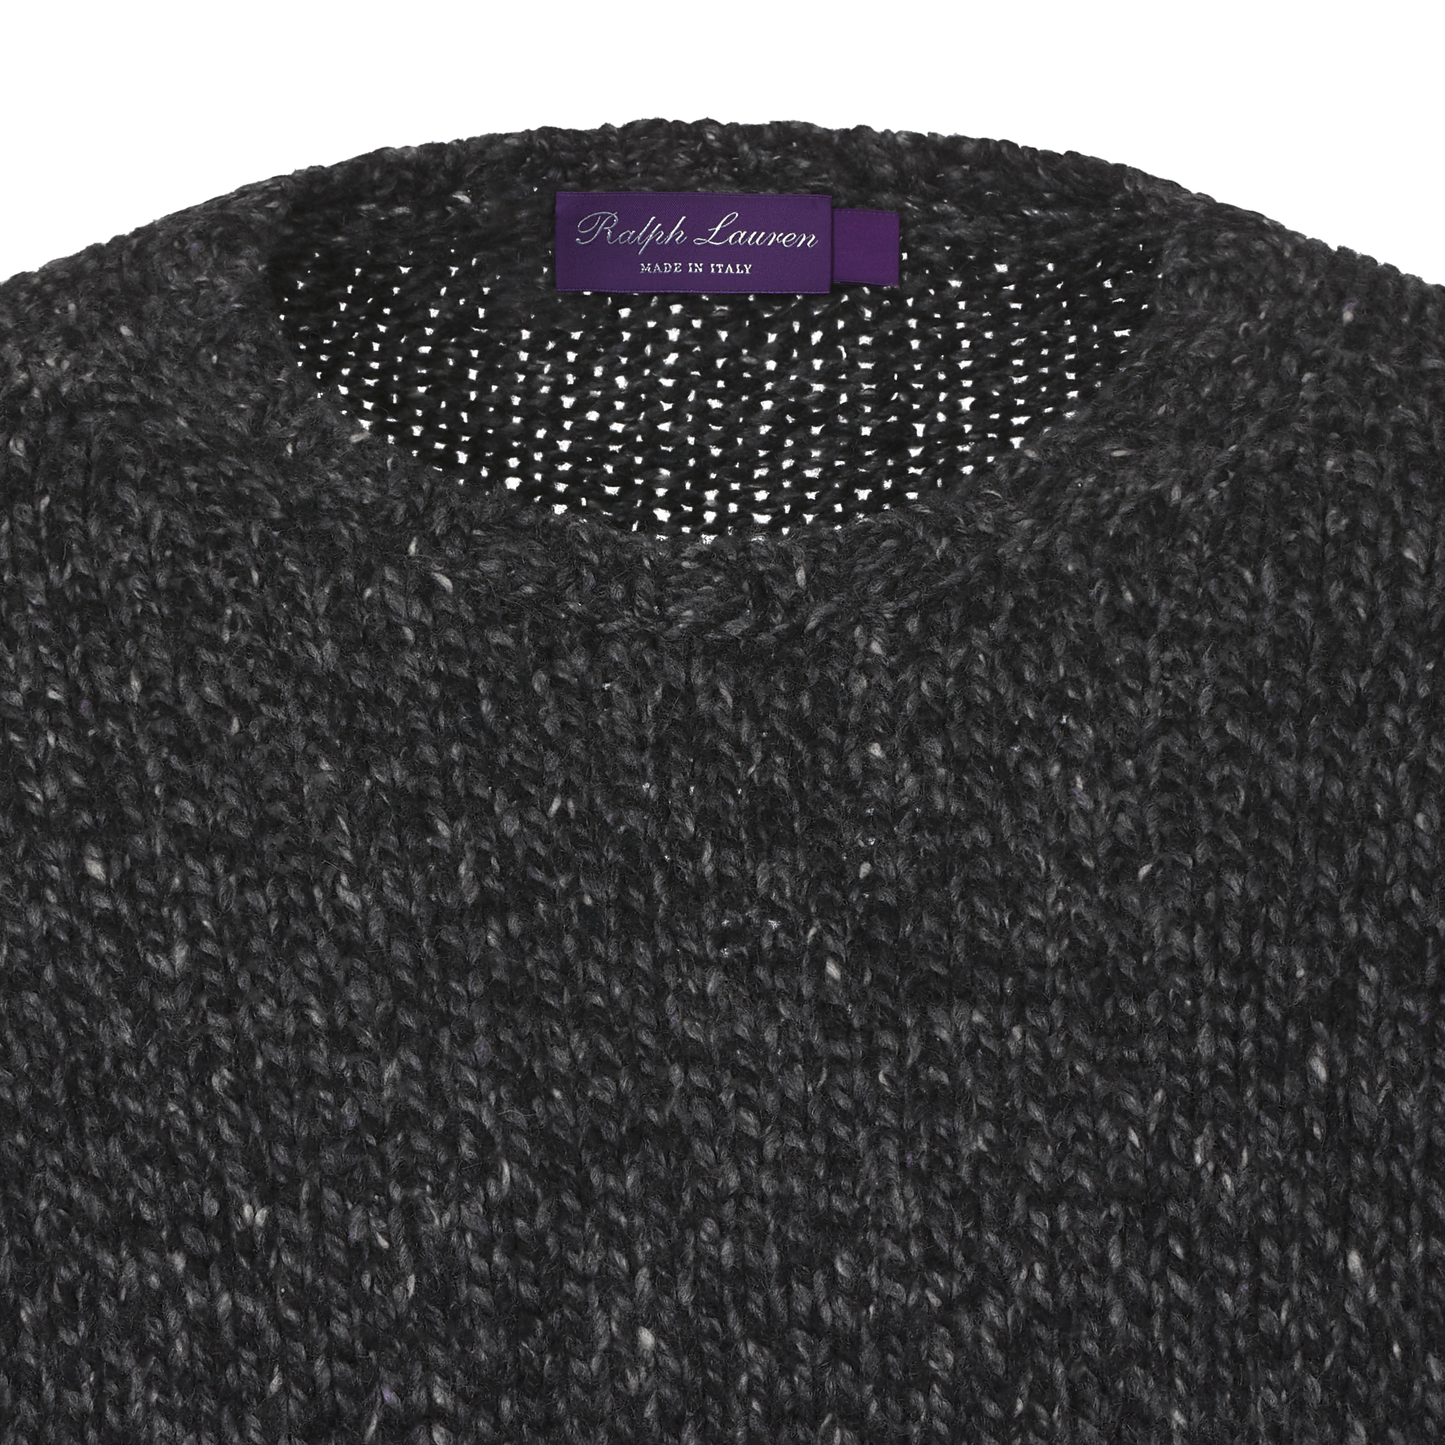 Cashmere Crew-Neck Sweater in Charcoal